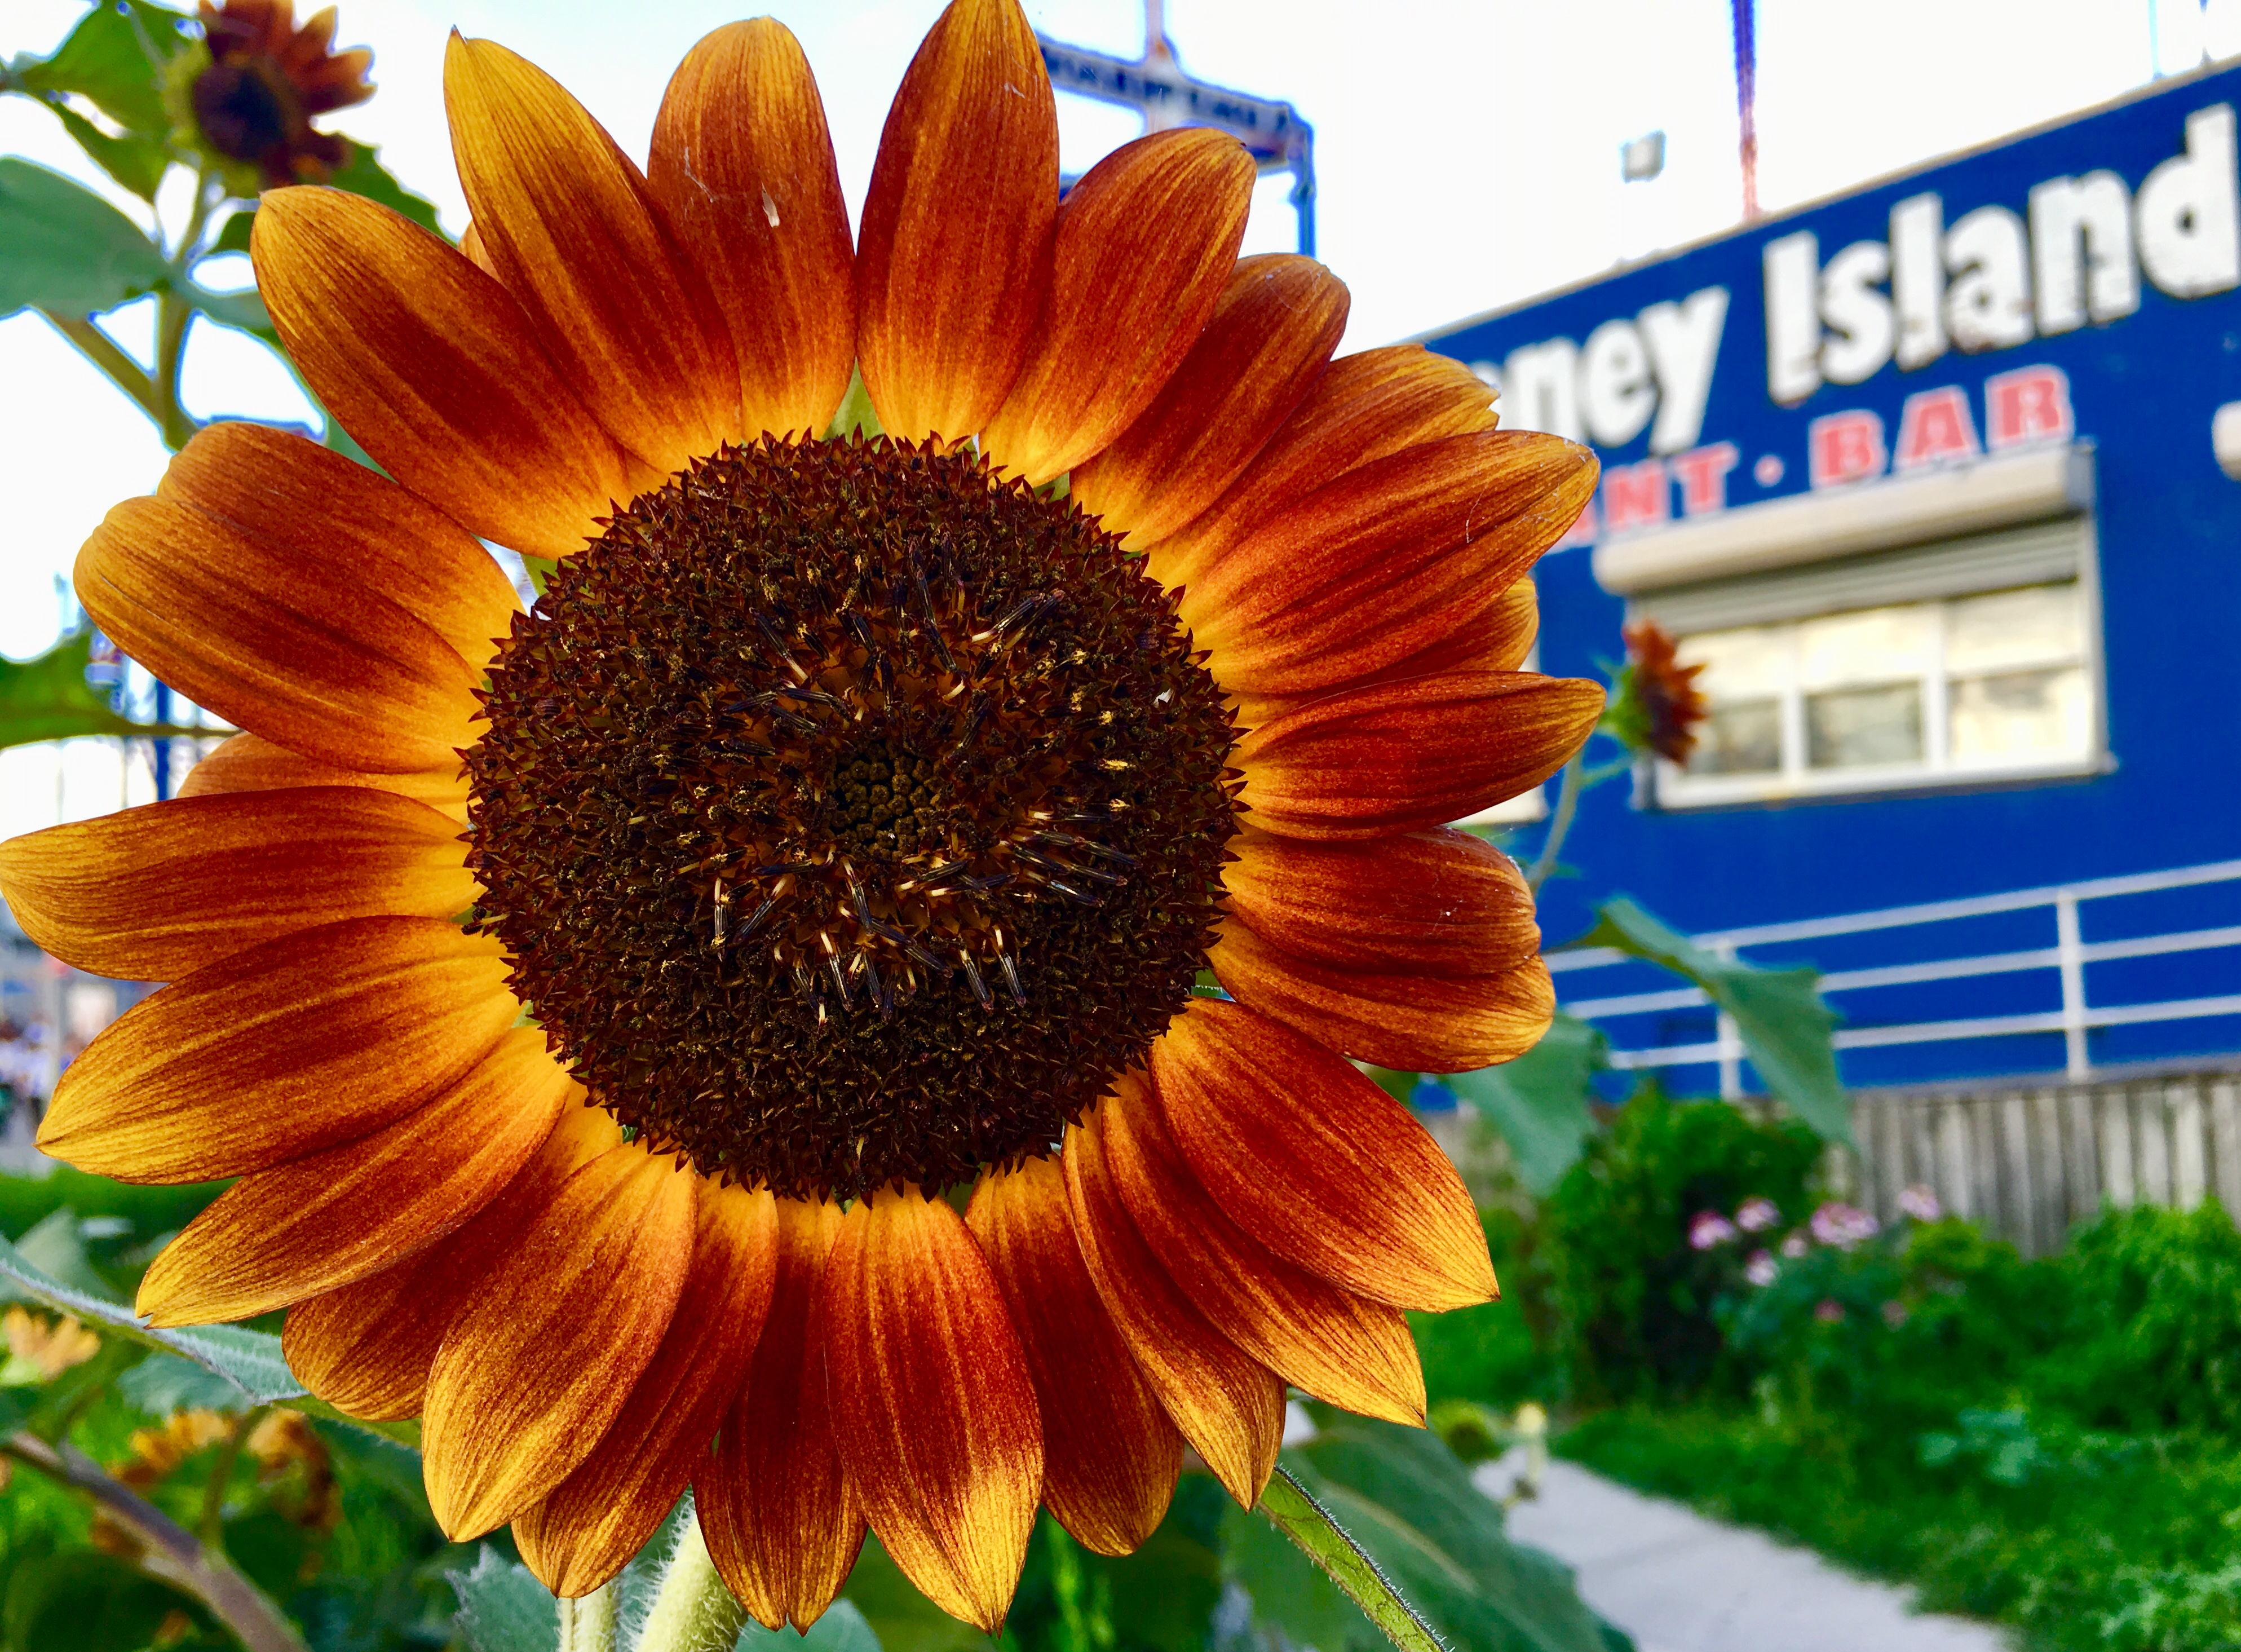 Seen beside the Coney Island Boardwalk: Here Comes The Sun(flower). Eagle photo by Lore Croghan